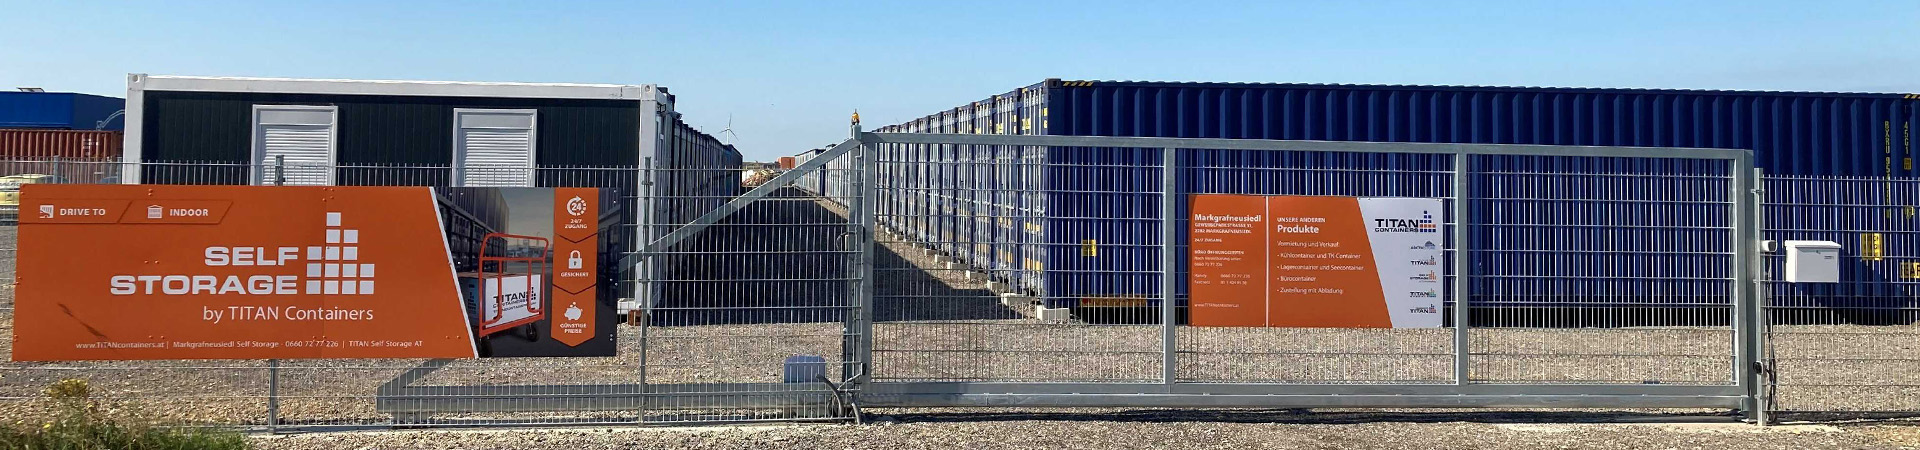 SELF STORAGE BY TITAN CONTAINERS -MARKGRAFNEUSIEDL